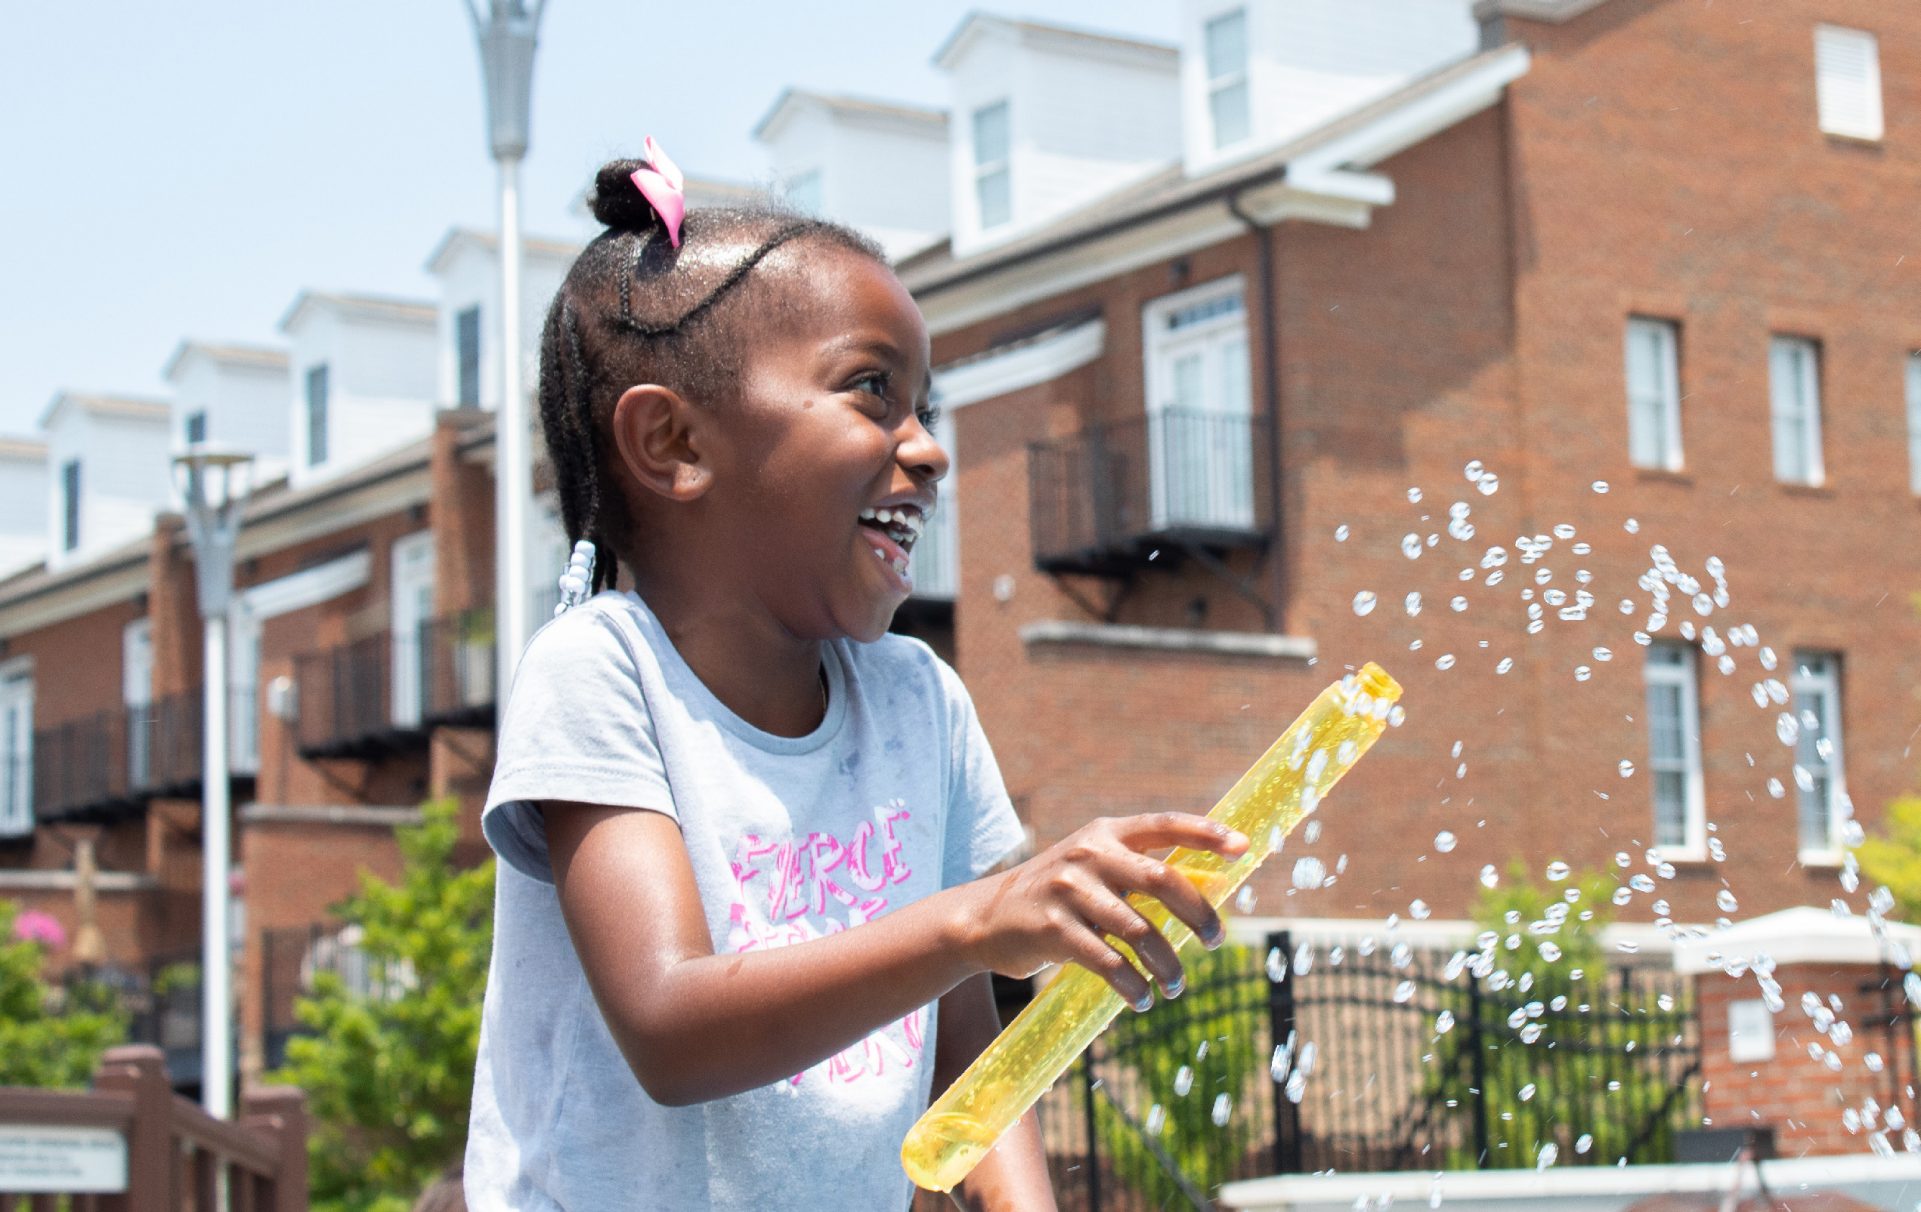 Girl in gray shirt laughs while playing with yellow tube at water fountain